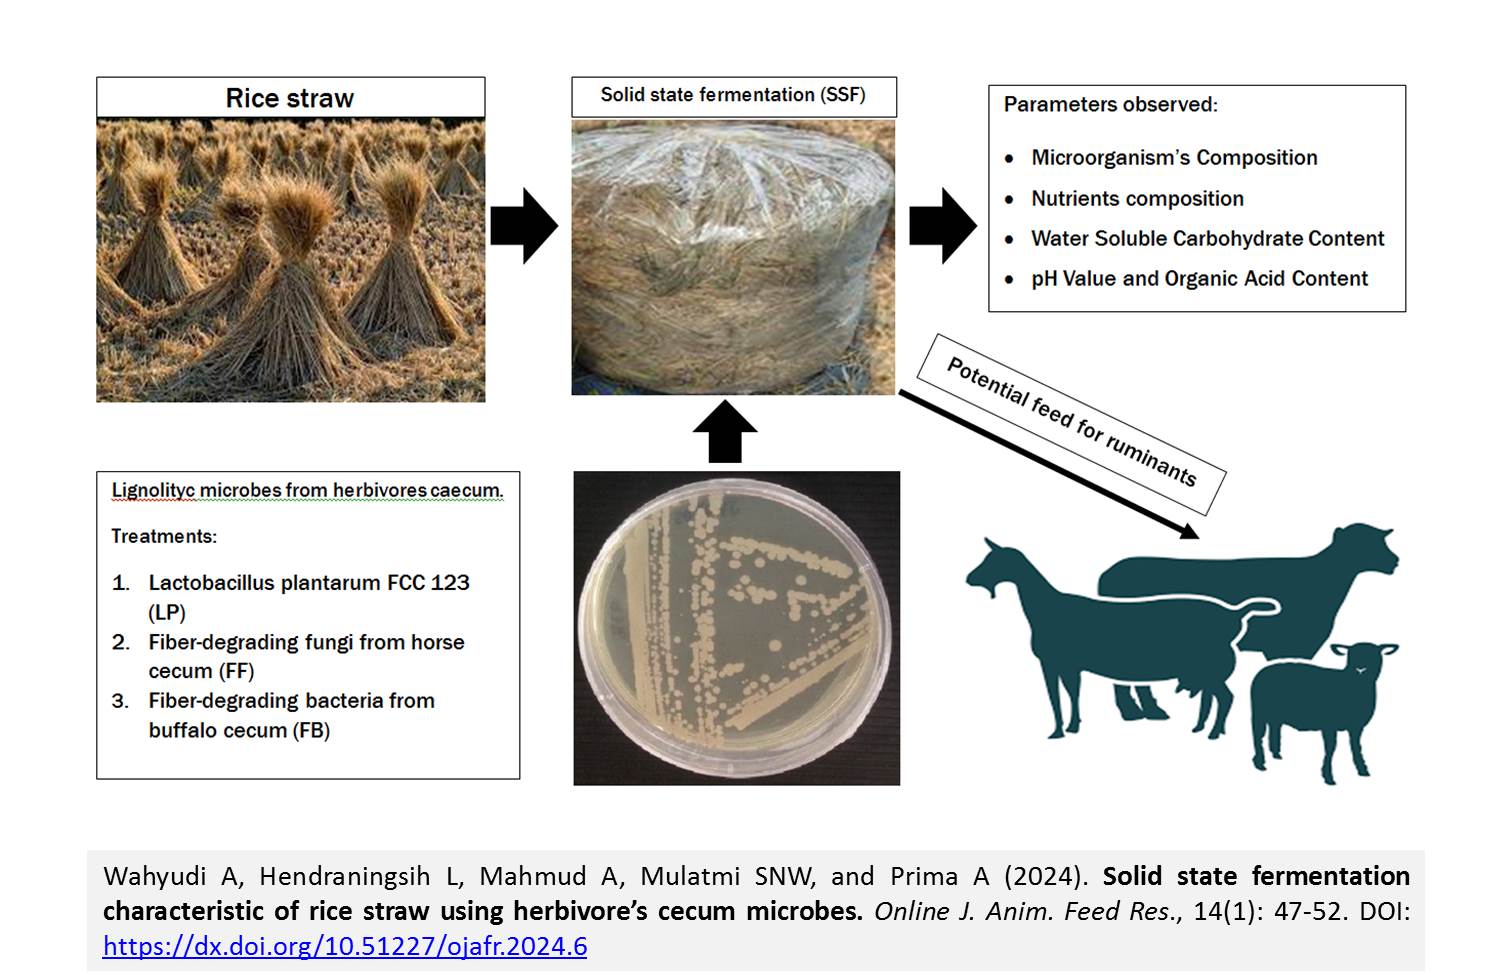 262-Solid_state_fermentation_characteristic_of_rice_straw_using_herbivores_cecum_microbes